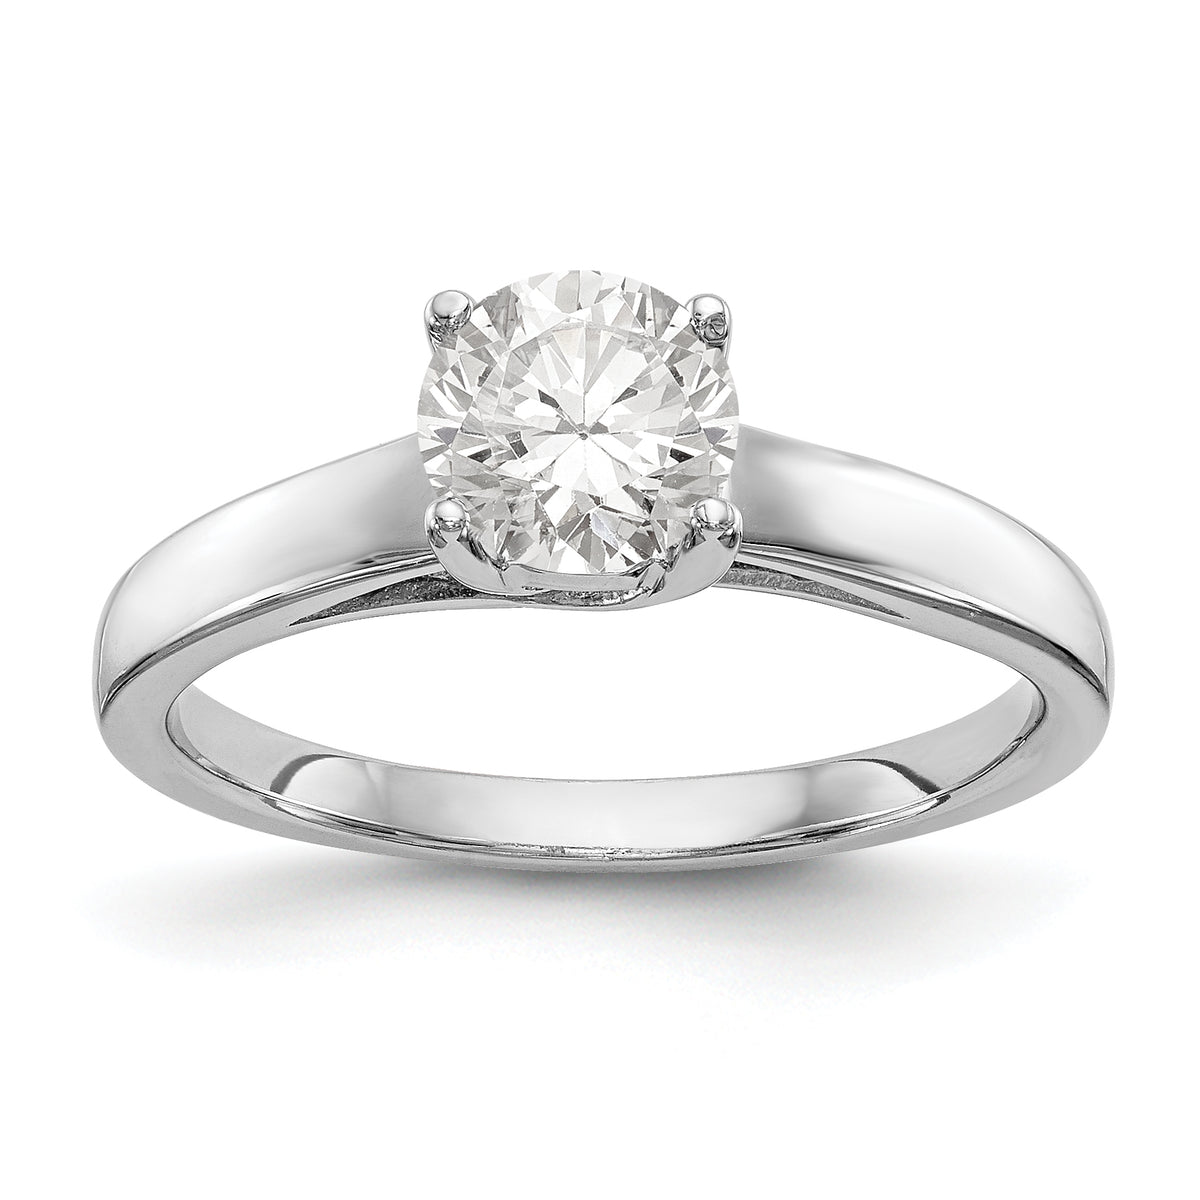 14K White Gold 1 carat (6.50 mm) 4-Prong Round Solitaire Engagement Ring Mounting